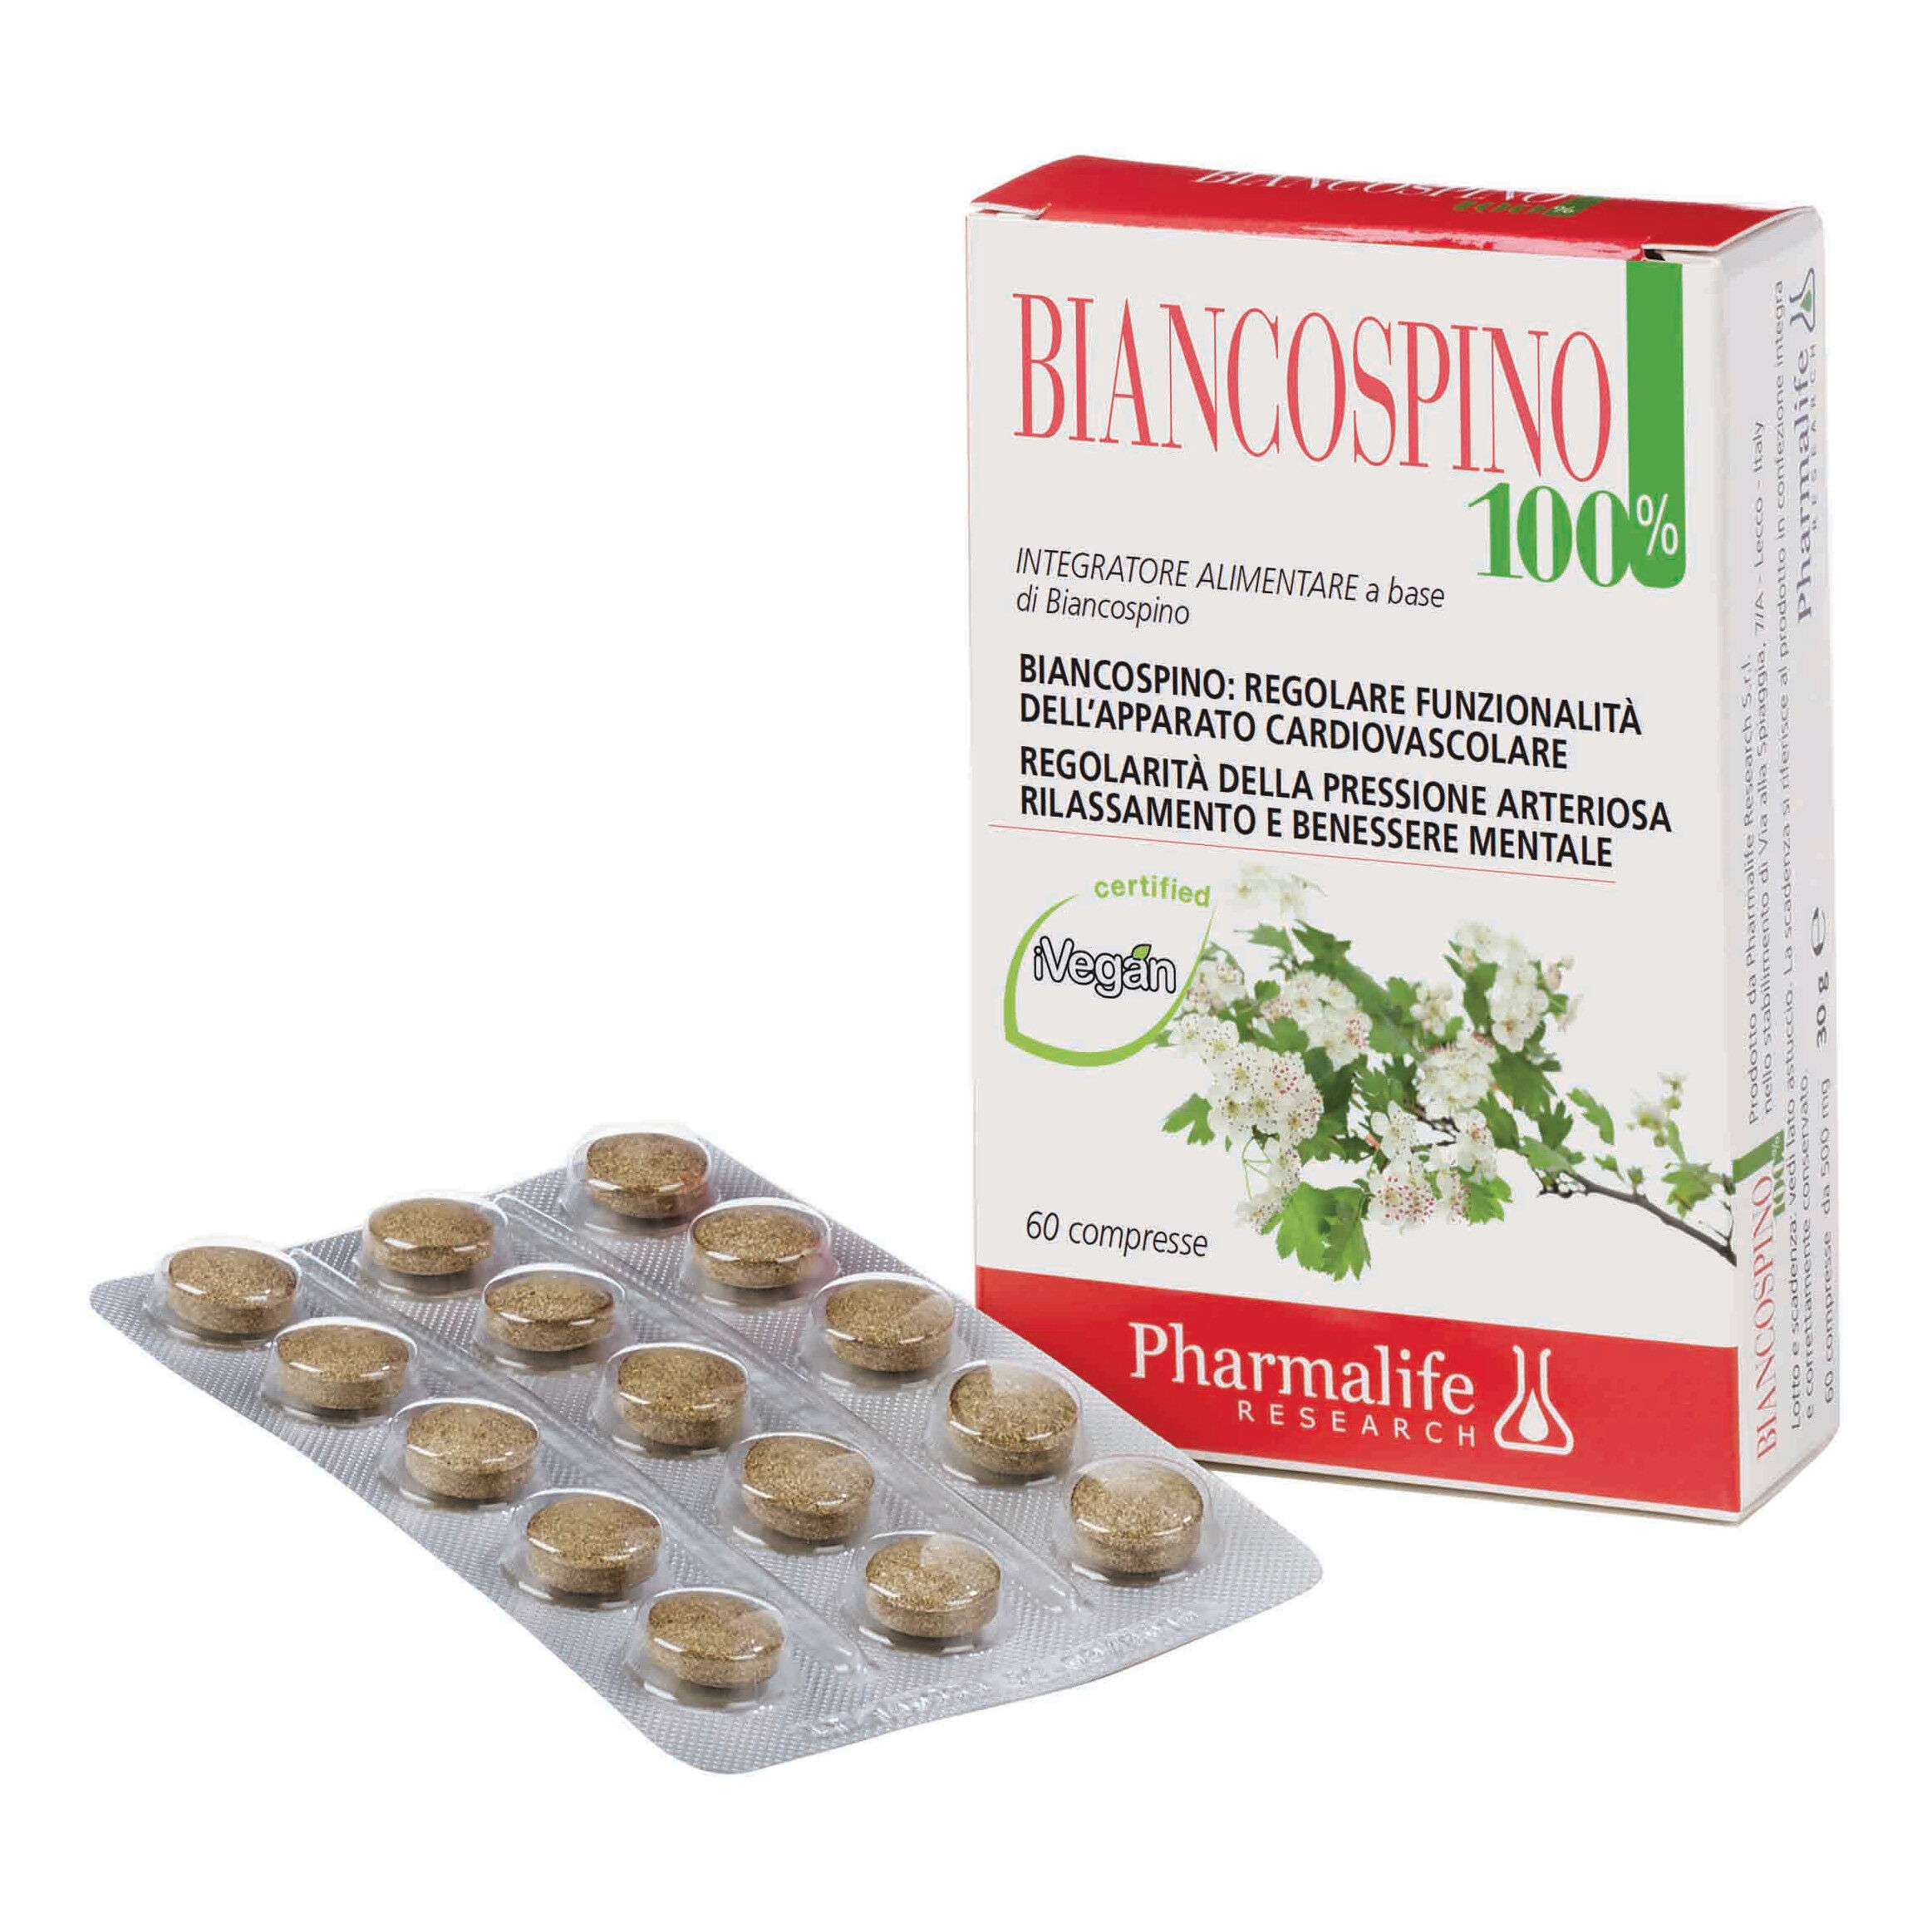 PHARMALIFE RESEARCH Srl Biancospino 100% 60 cpr phr